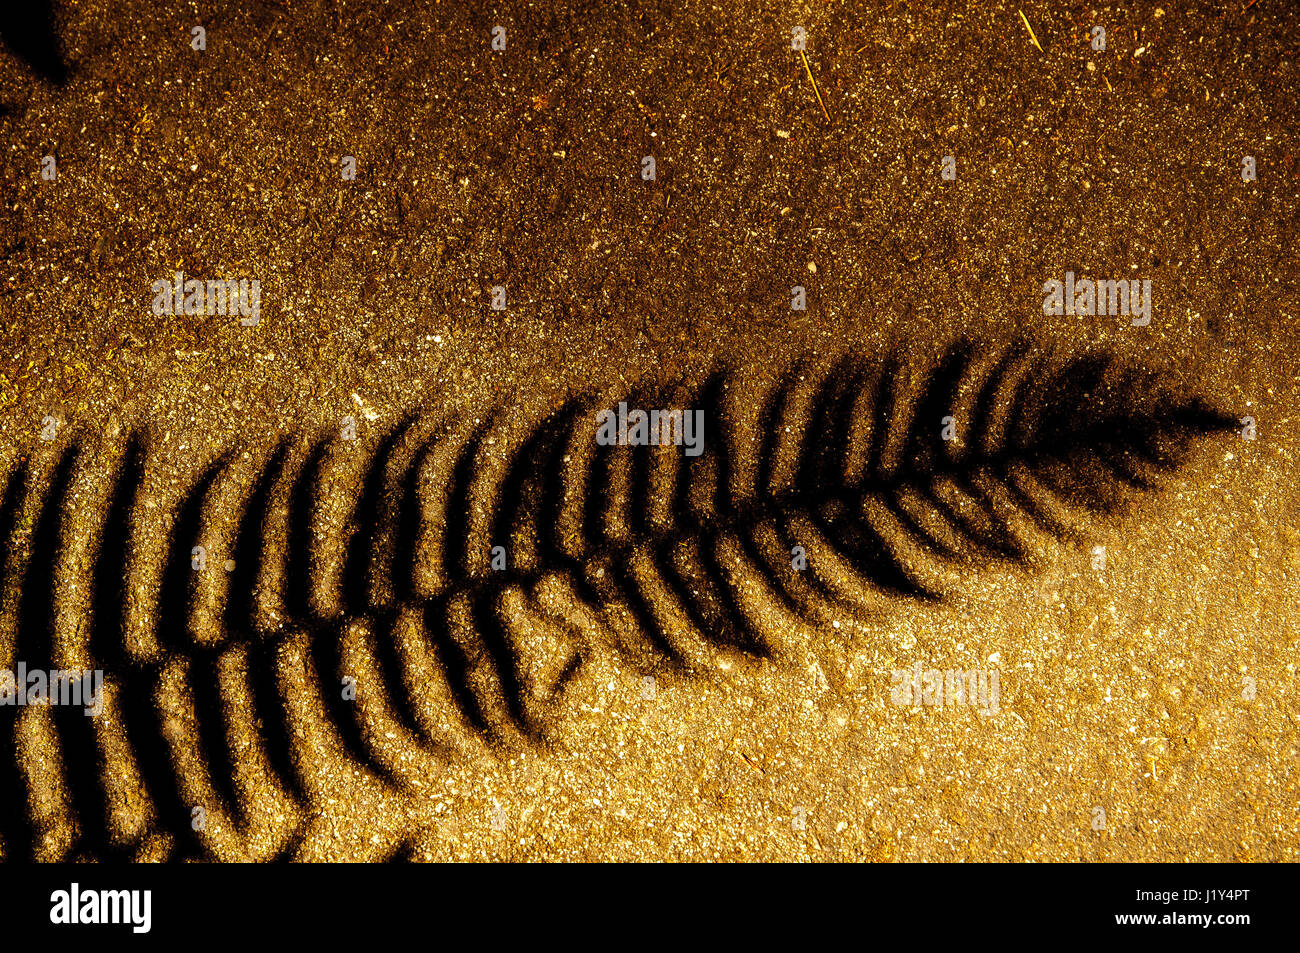 Shadow of sword fern, close-up Stock Photo